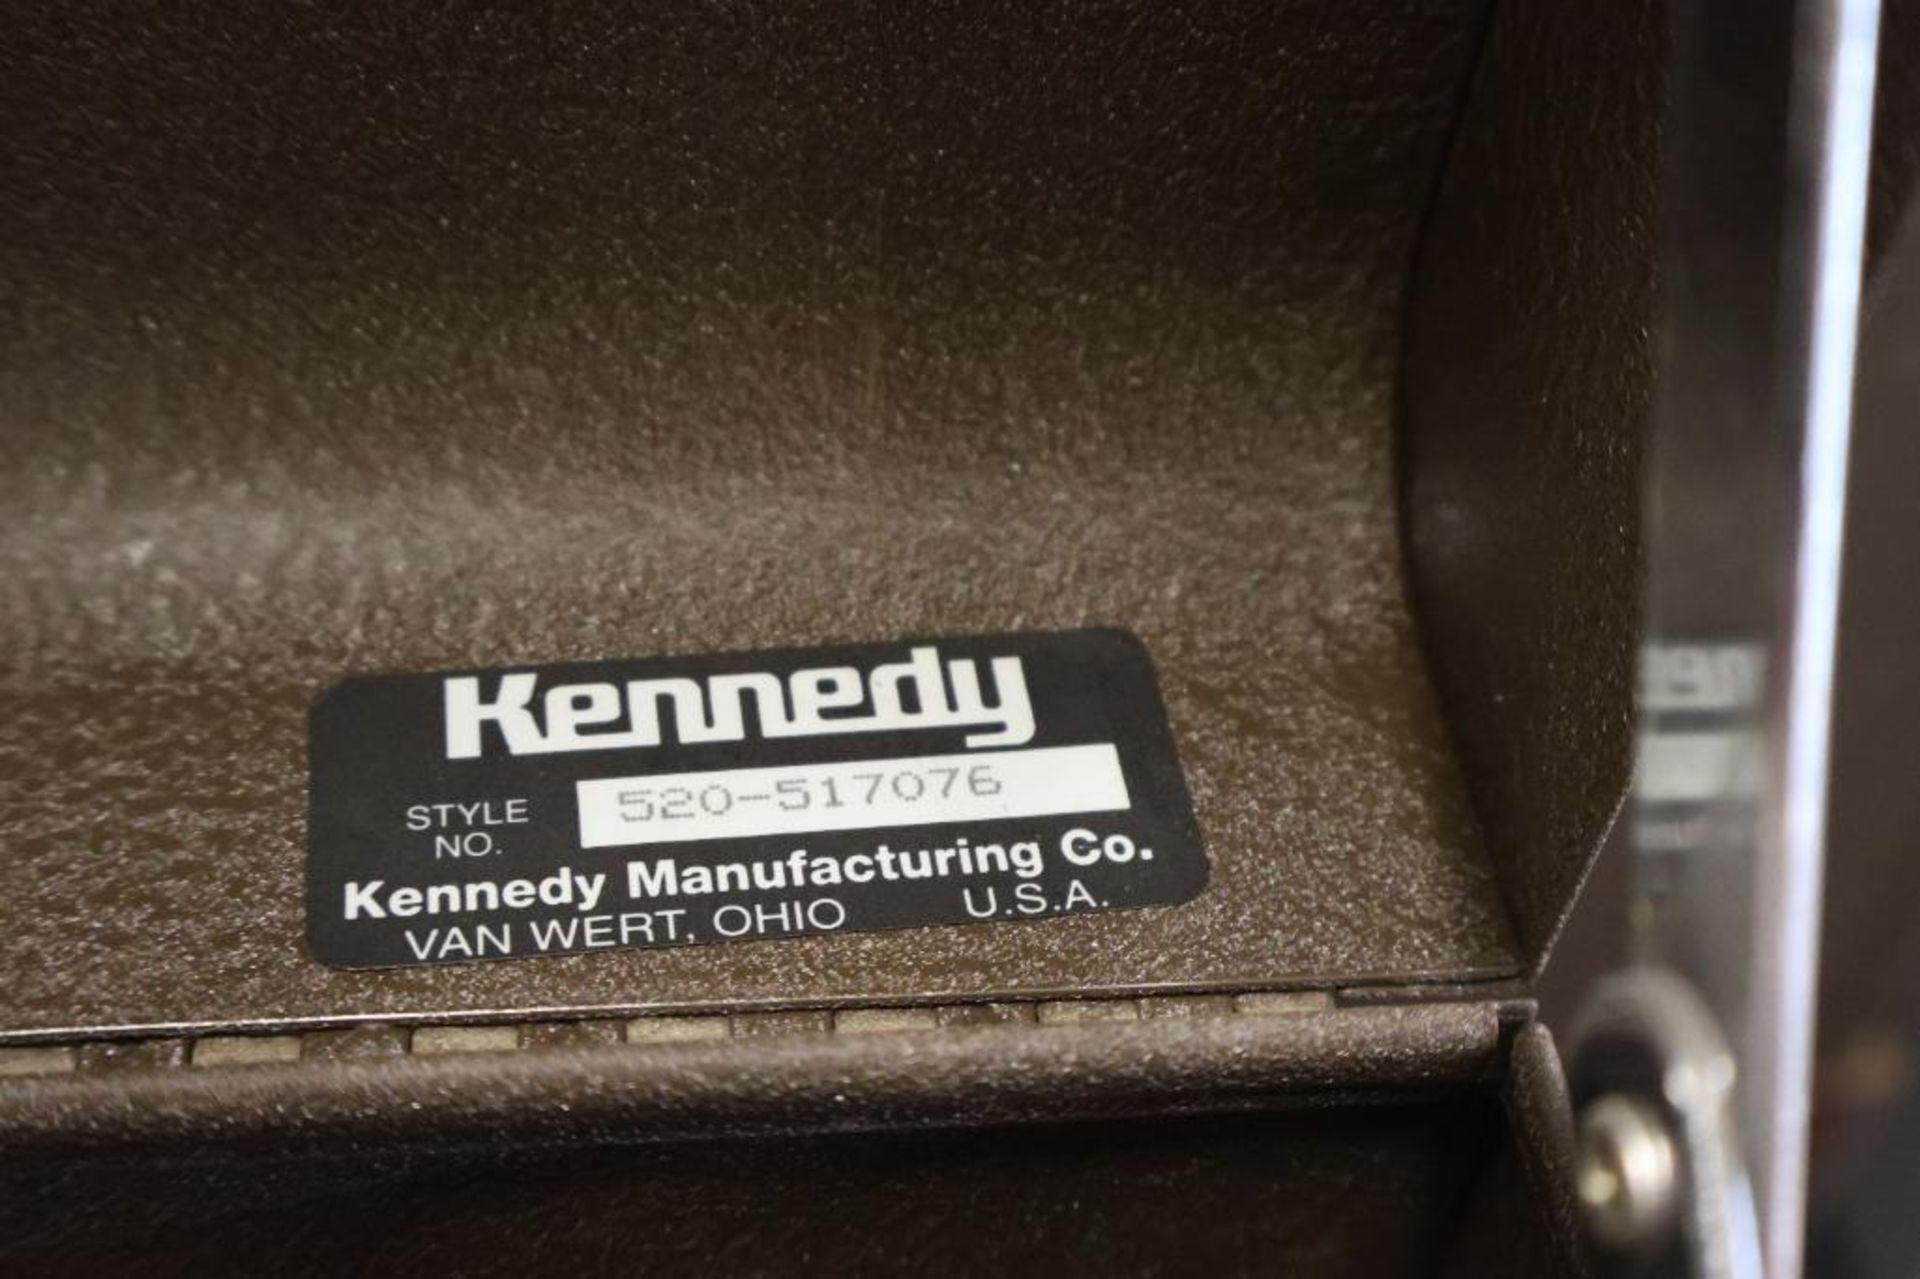 Kennedy tool box 520-517076 - Image 4 of 8